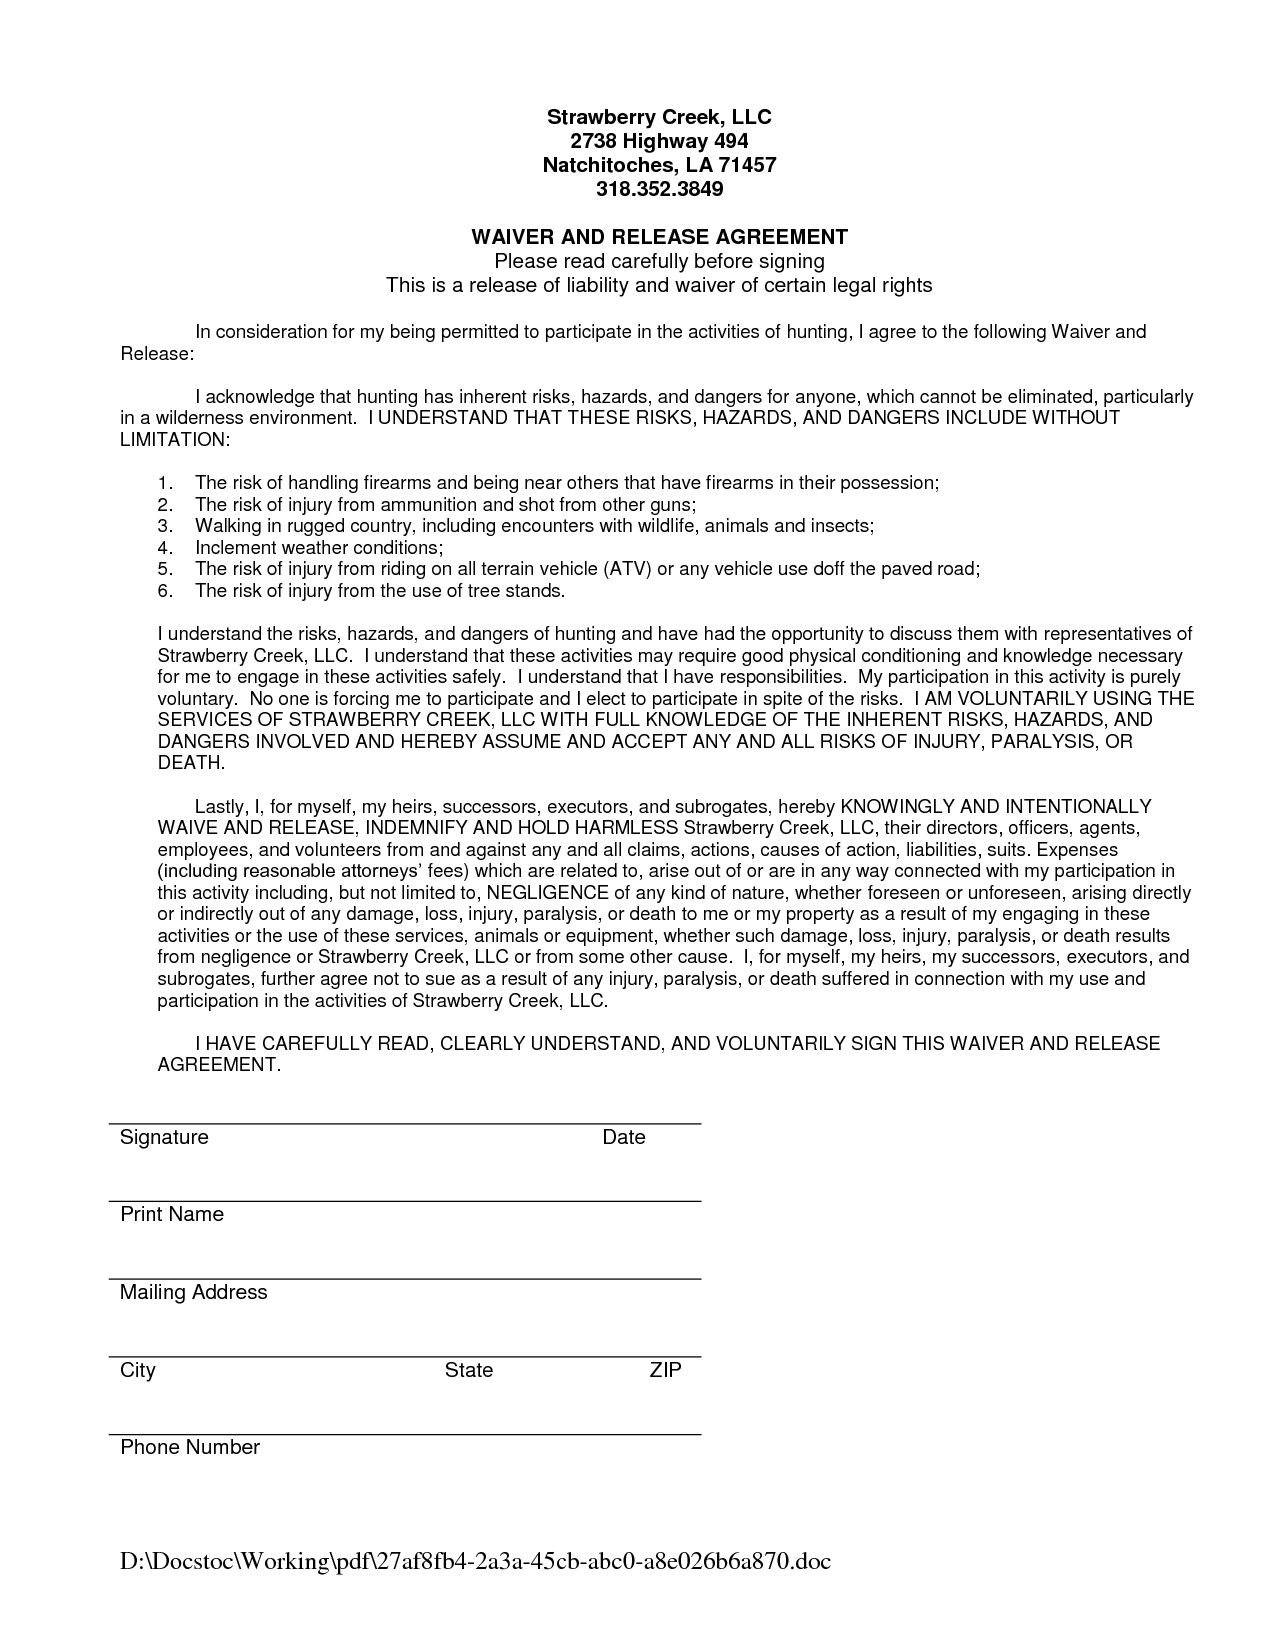 Waiver Of Liability Sample - Free Printable Documents | Waiver - Free Printable Documents